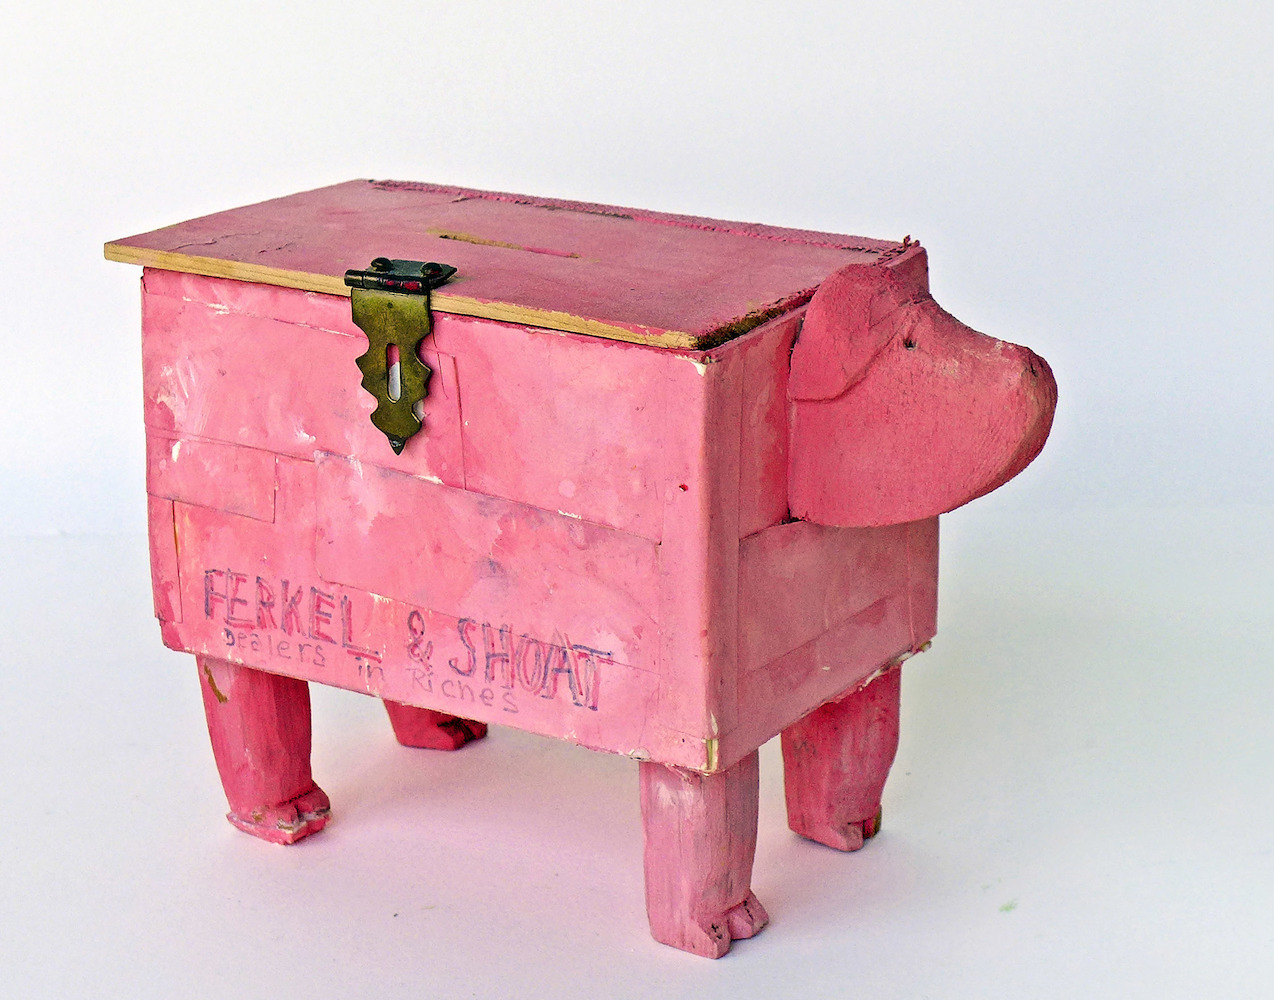 Ferkel and Shoat - Dealers and Riches (Piggy Bank)